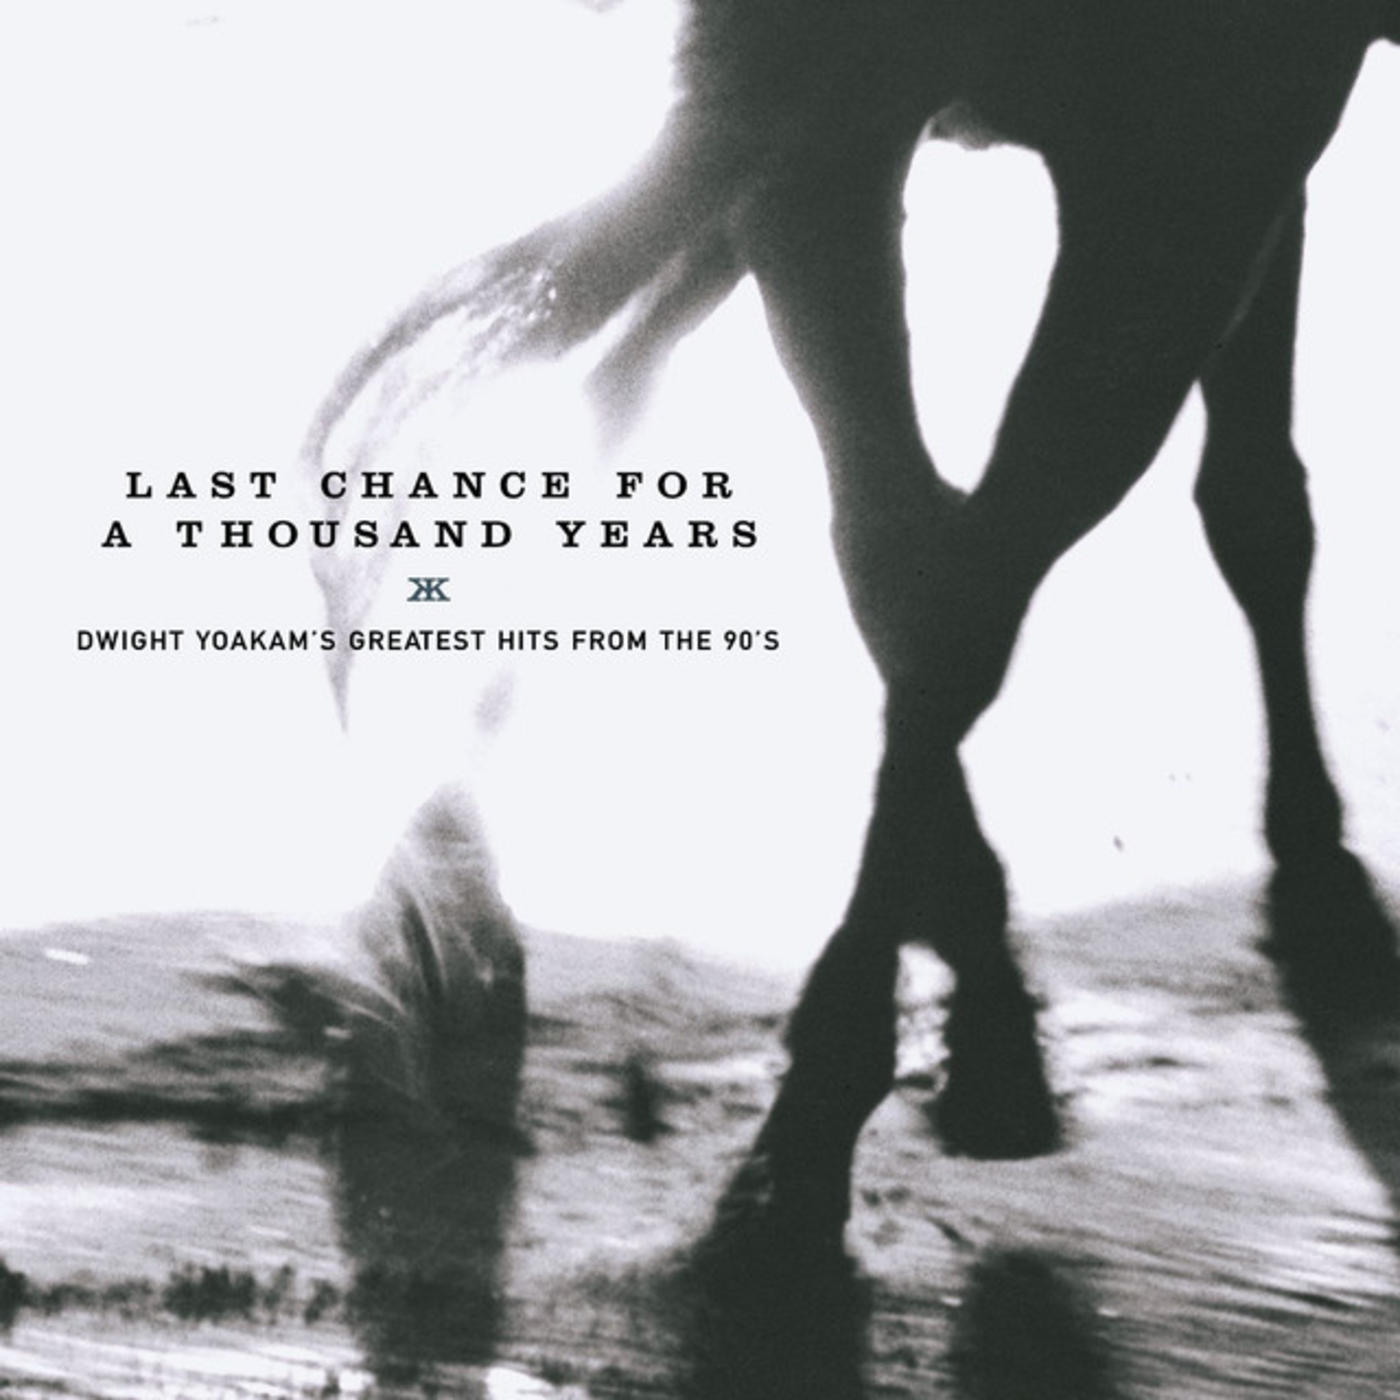 Last Chance For A Thousand Years - Dwight Yoakam's Greatest Hits From The 90's (U.S. Version)